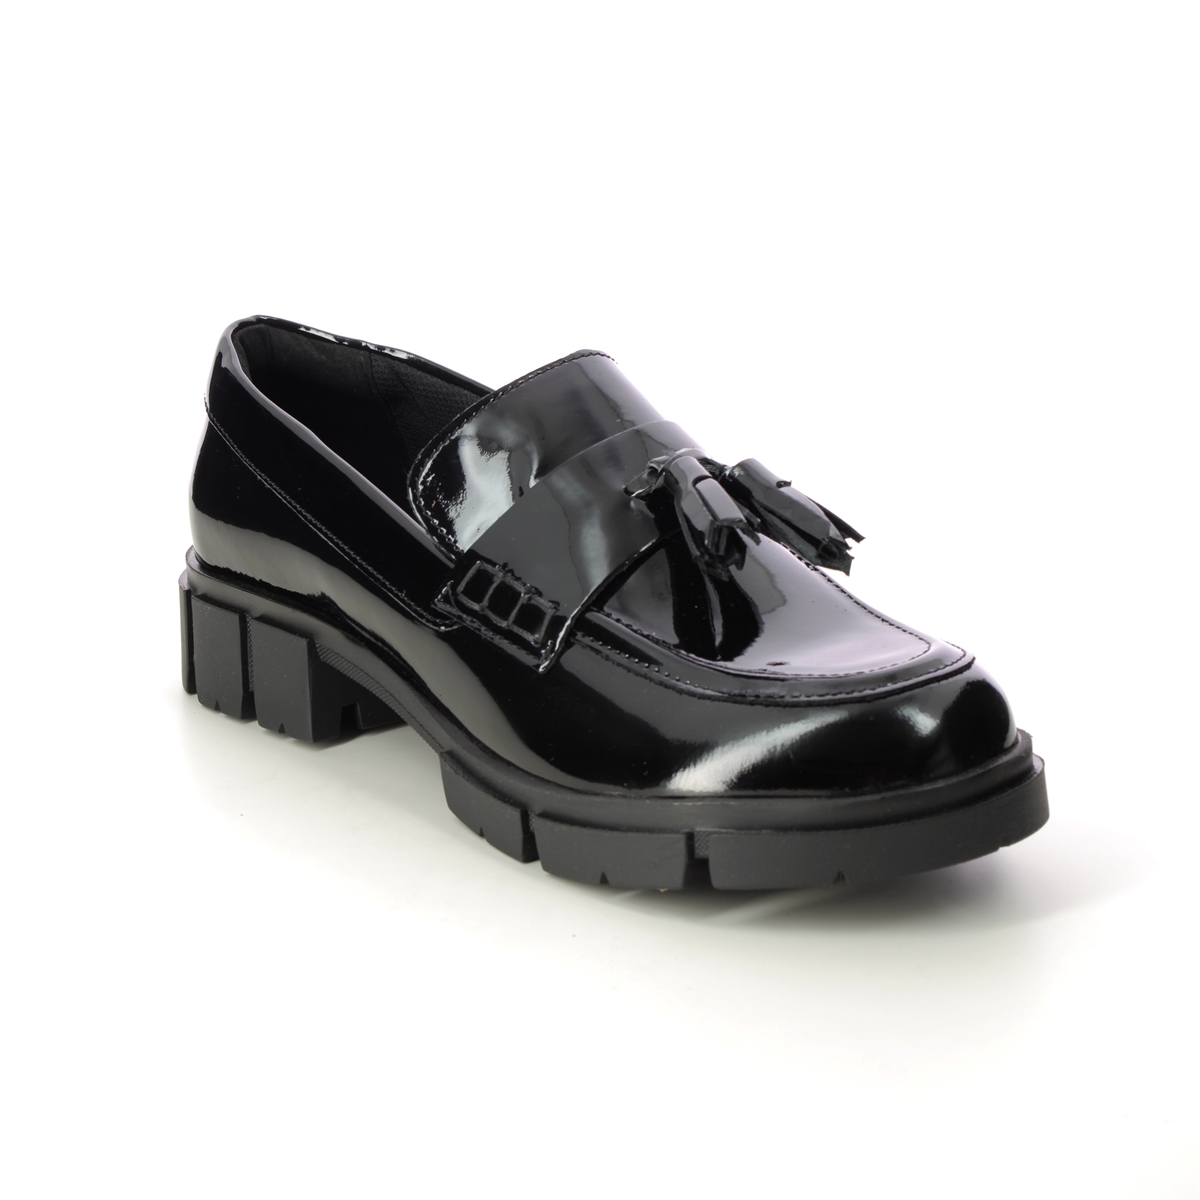 Clarks Teala Loafer Black patent Womens loafers 6899-84D in a Plain Leather in Size 4.5